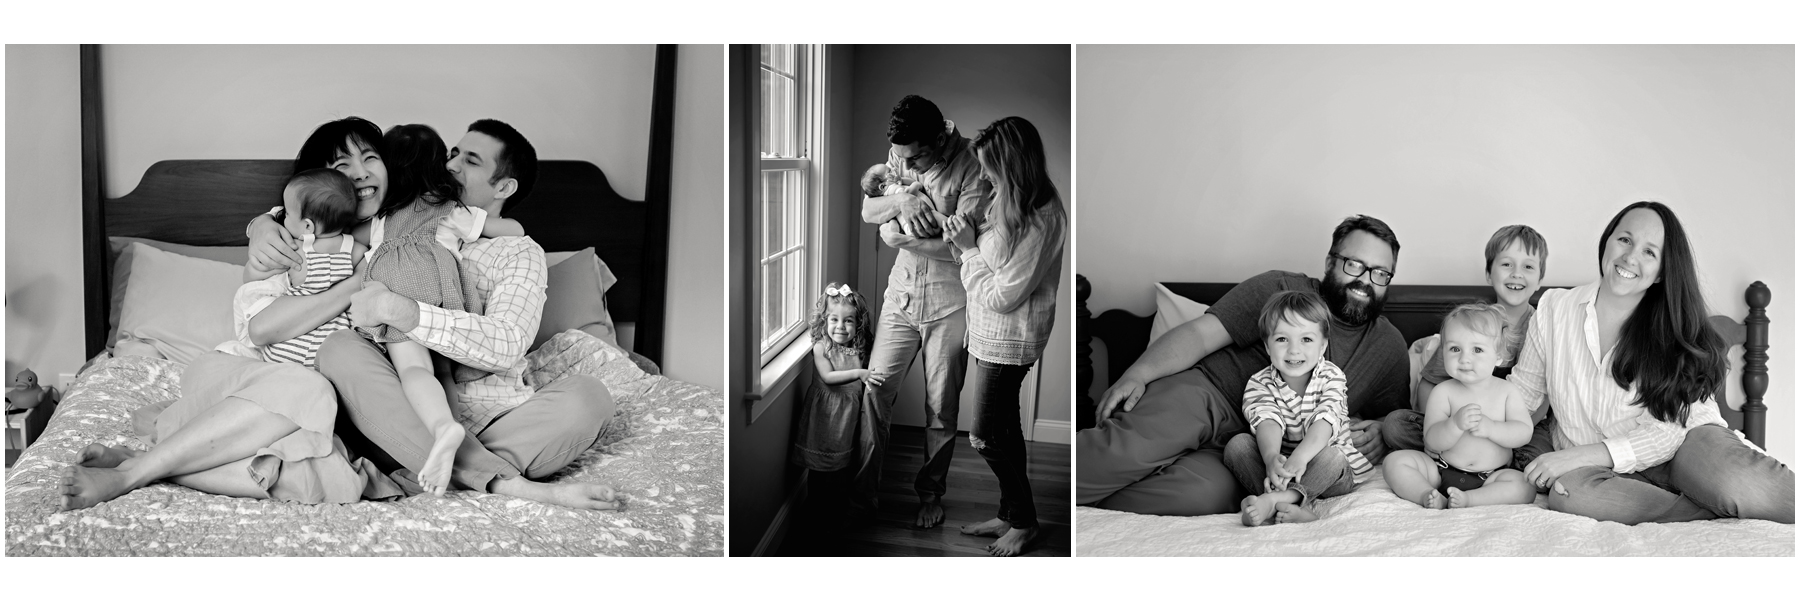 Amy Ro Photography is an on-location family and newborn photographer located in Rhode Island